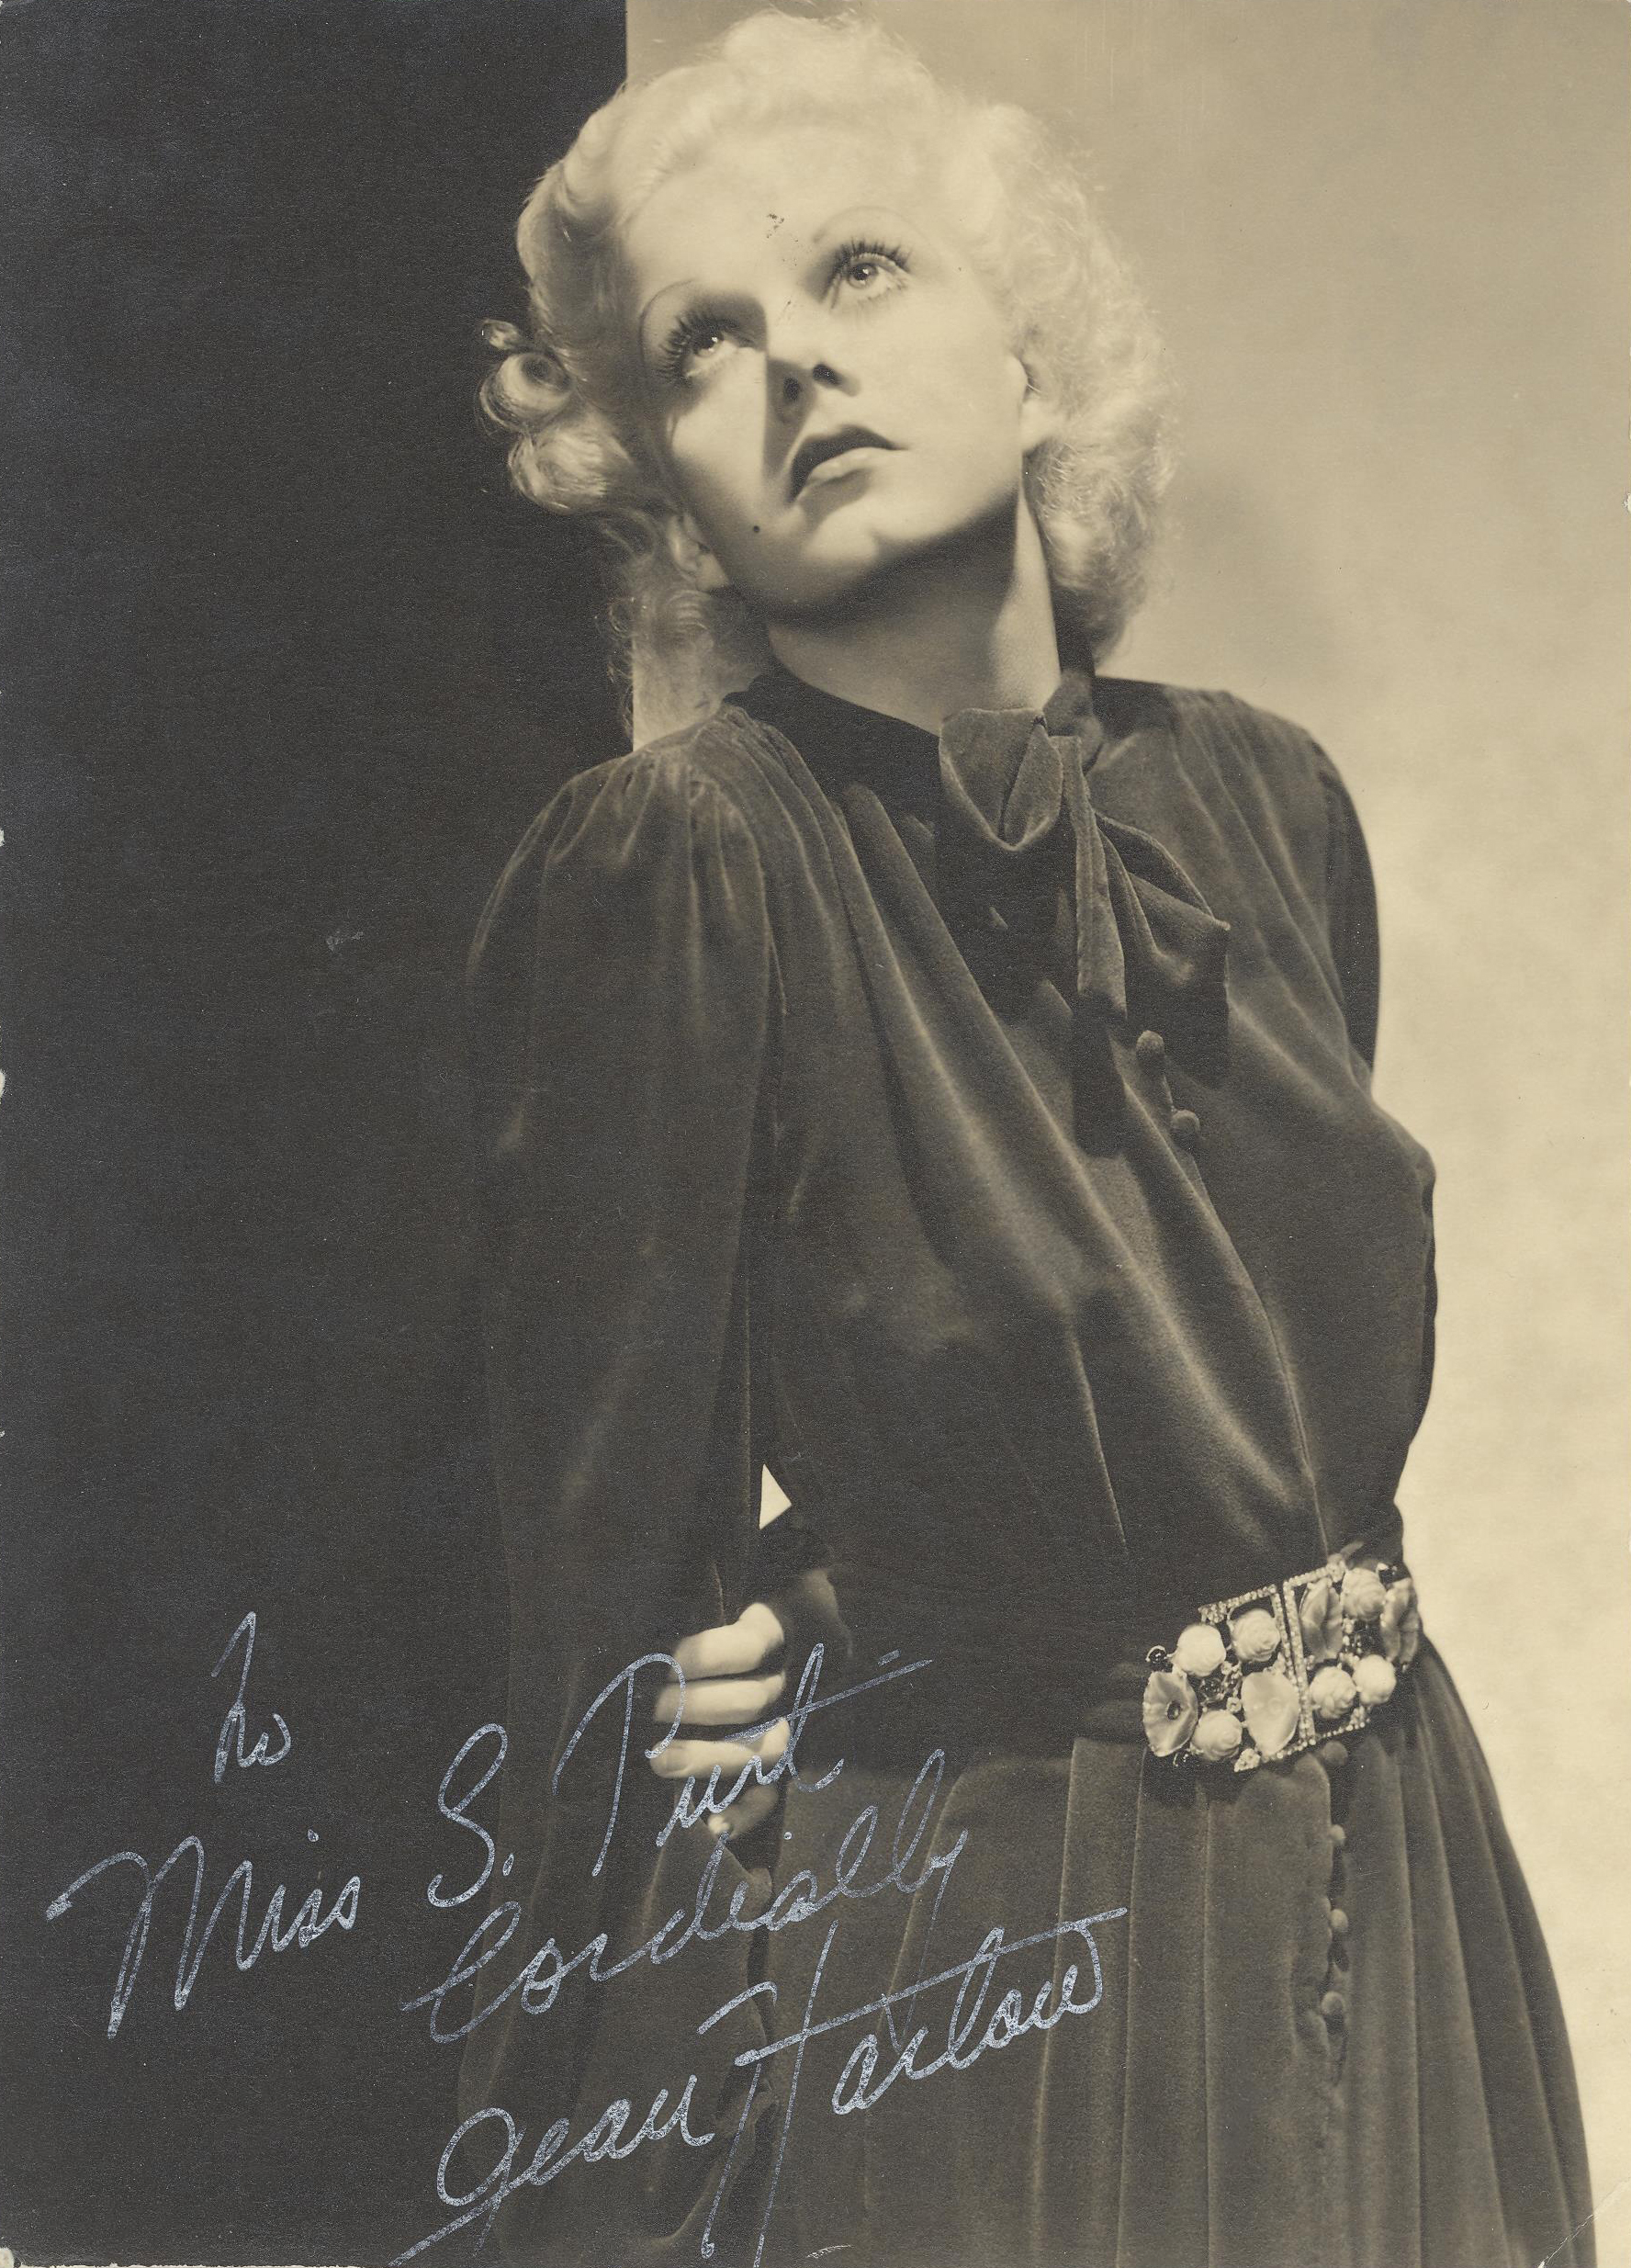 Jean Harlow Photo signed by Mother.